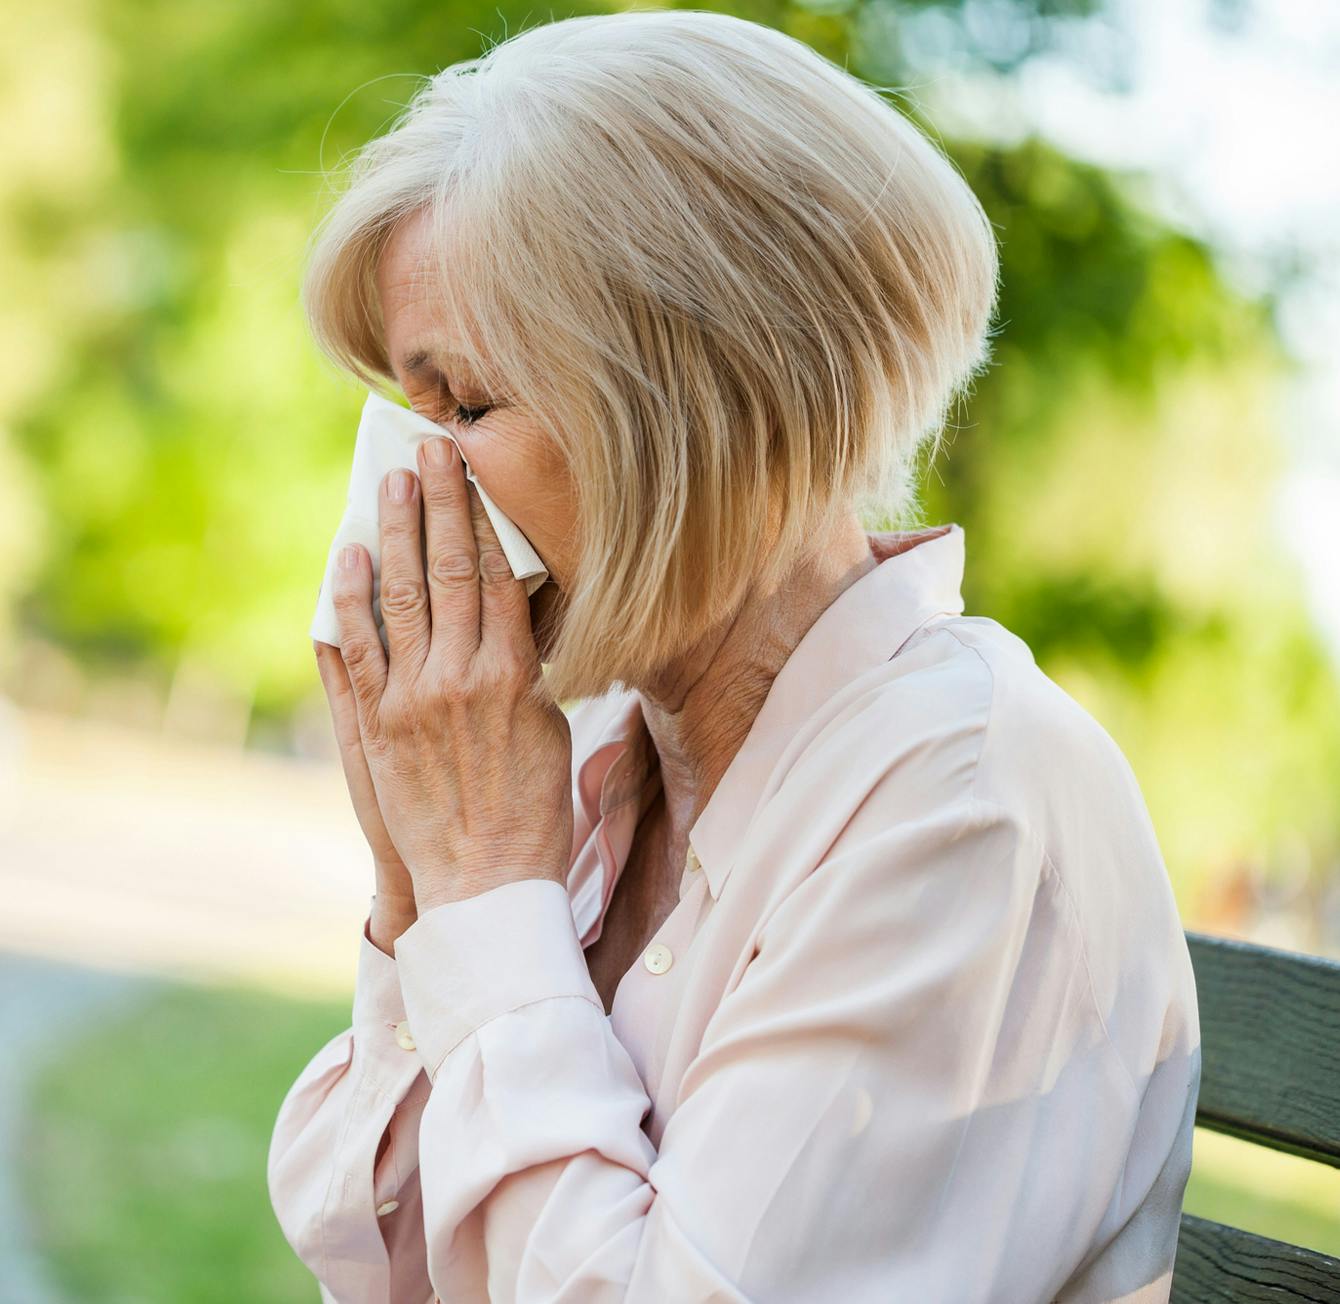 an image of an older woman blowing their nose into a tissue